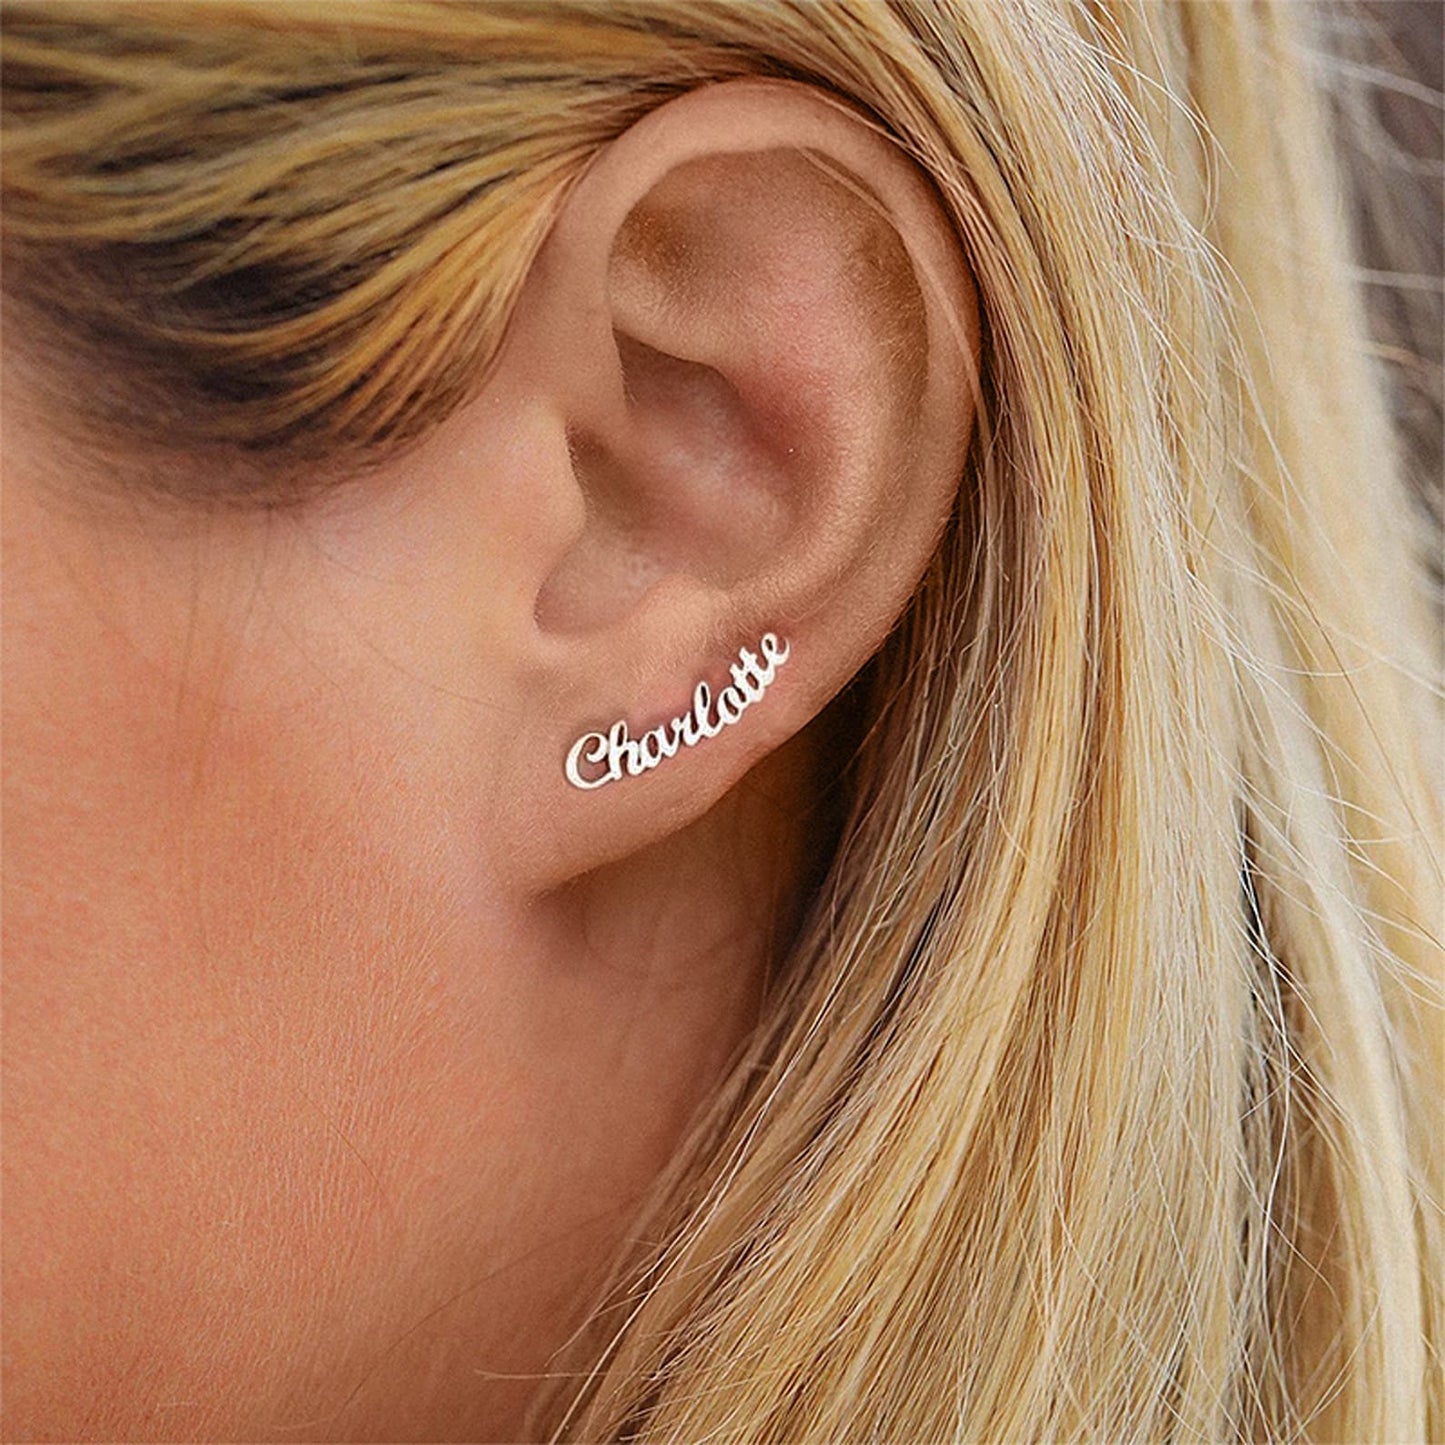 Original pierced earrings 01 (with name, curved)